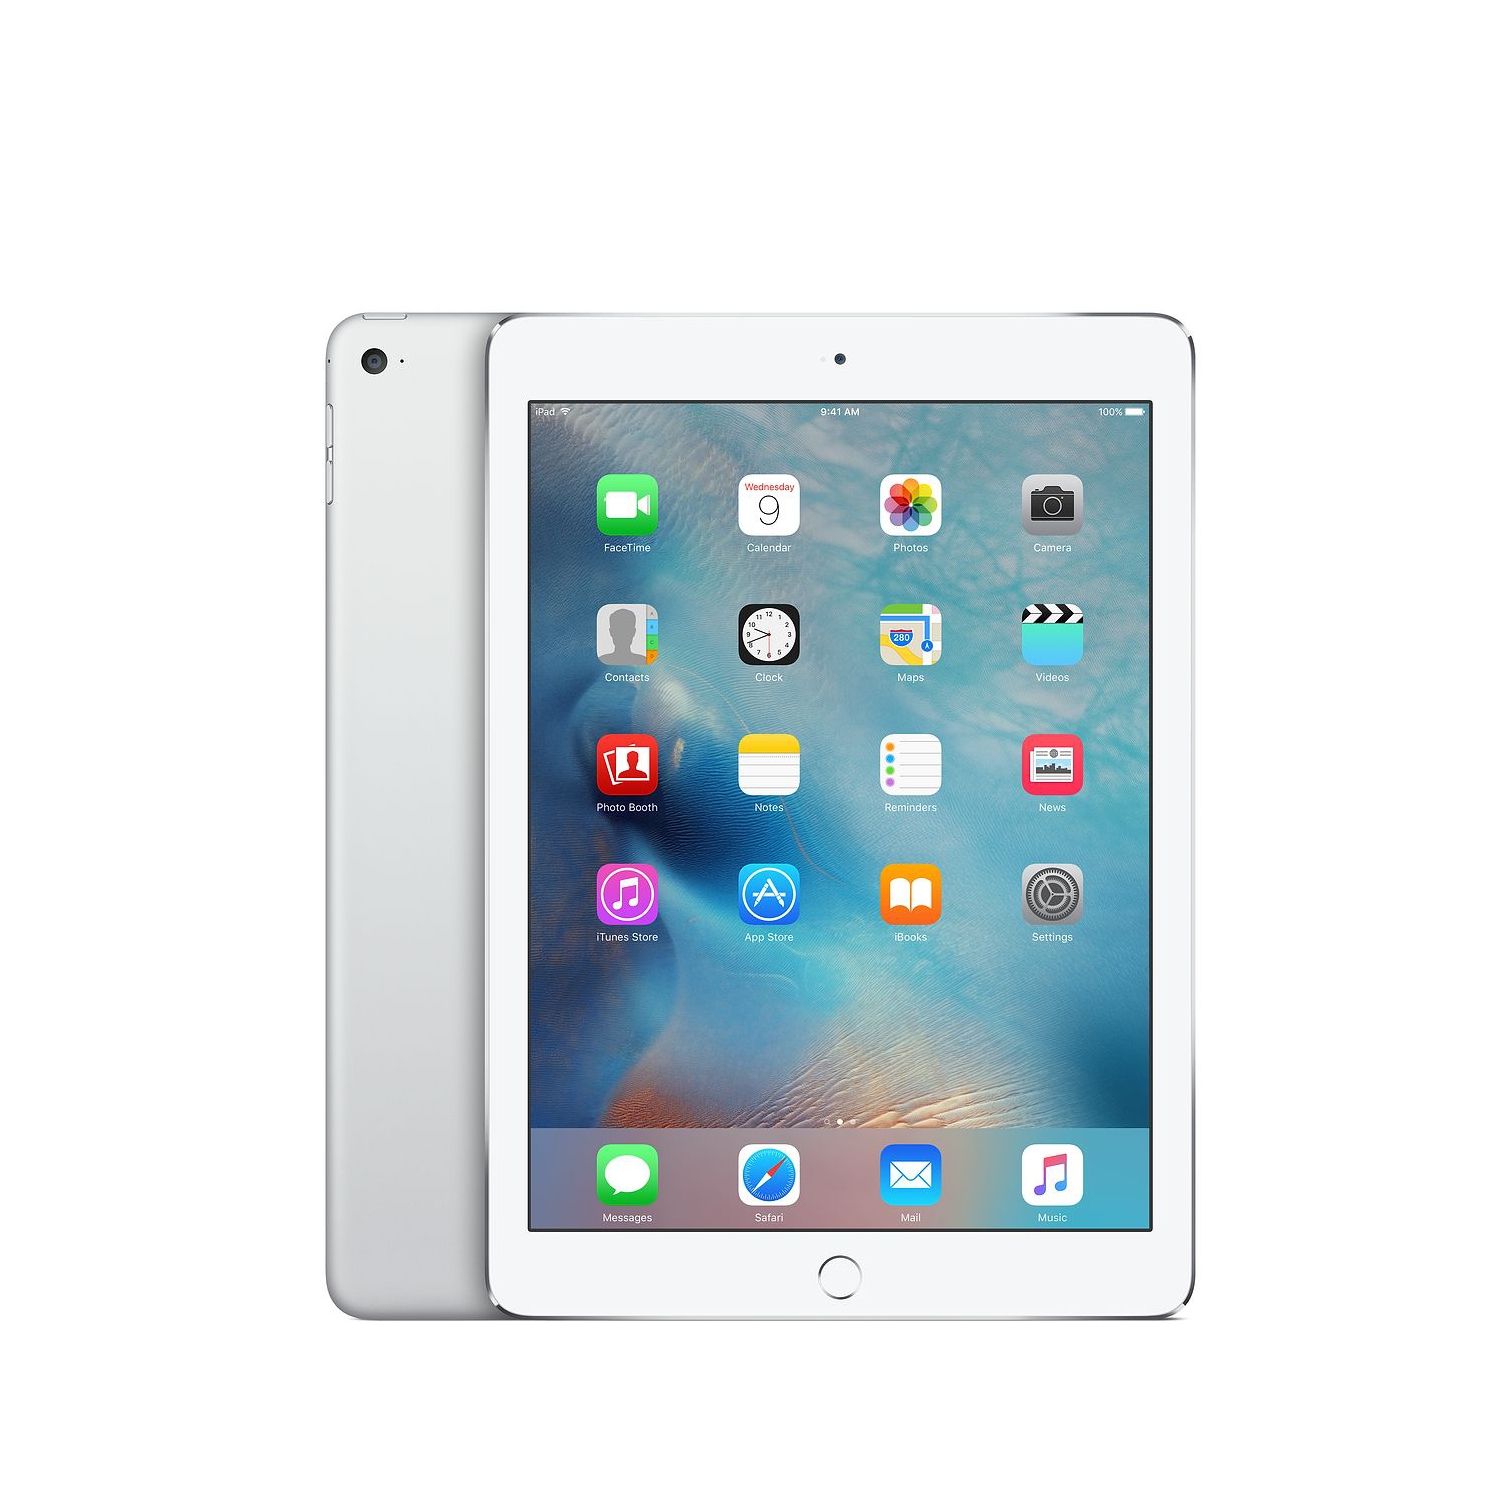 Refurbished (Excellent) - Apple iPad Air 2 9.7" screen 64GB - WiFi + Cellular (2014 - A1567) Silver - Certified Refurbished